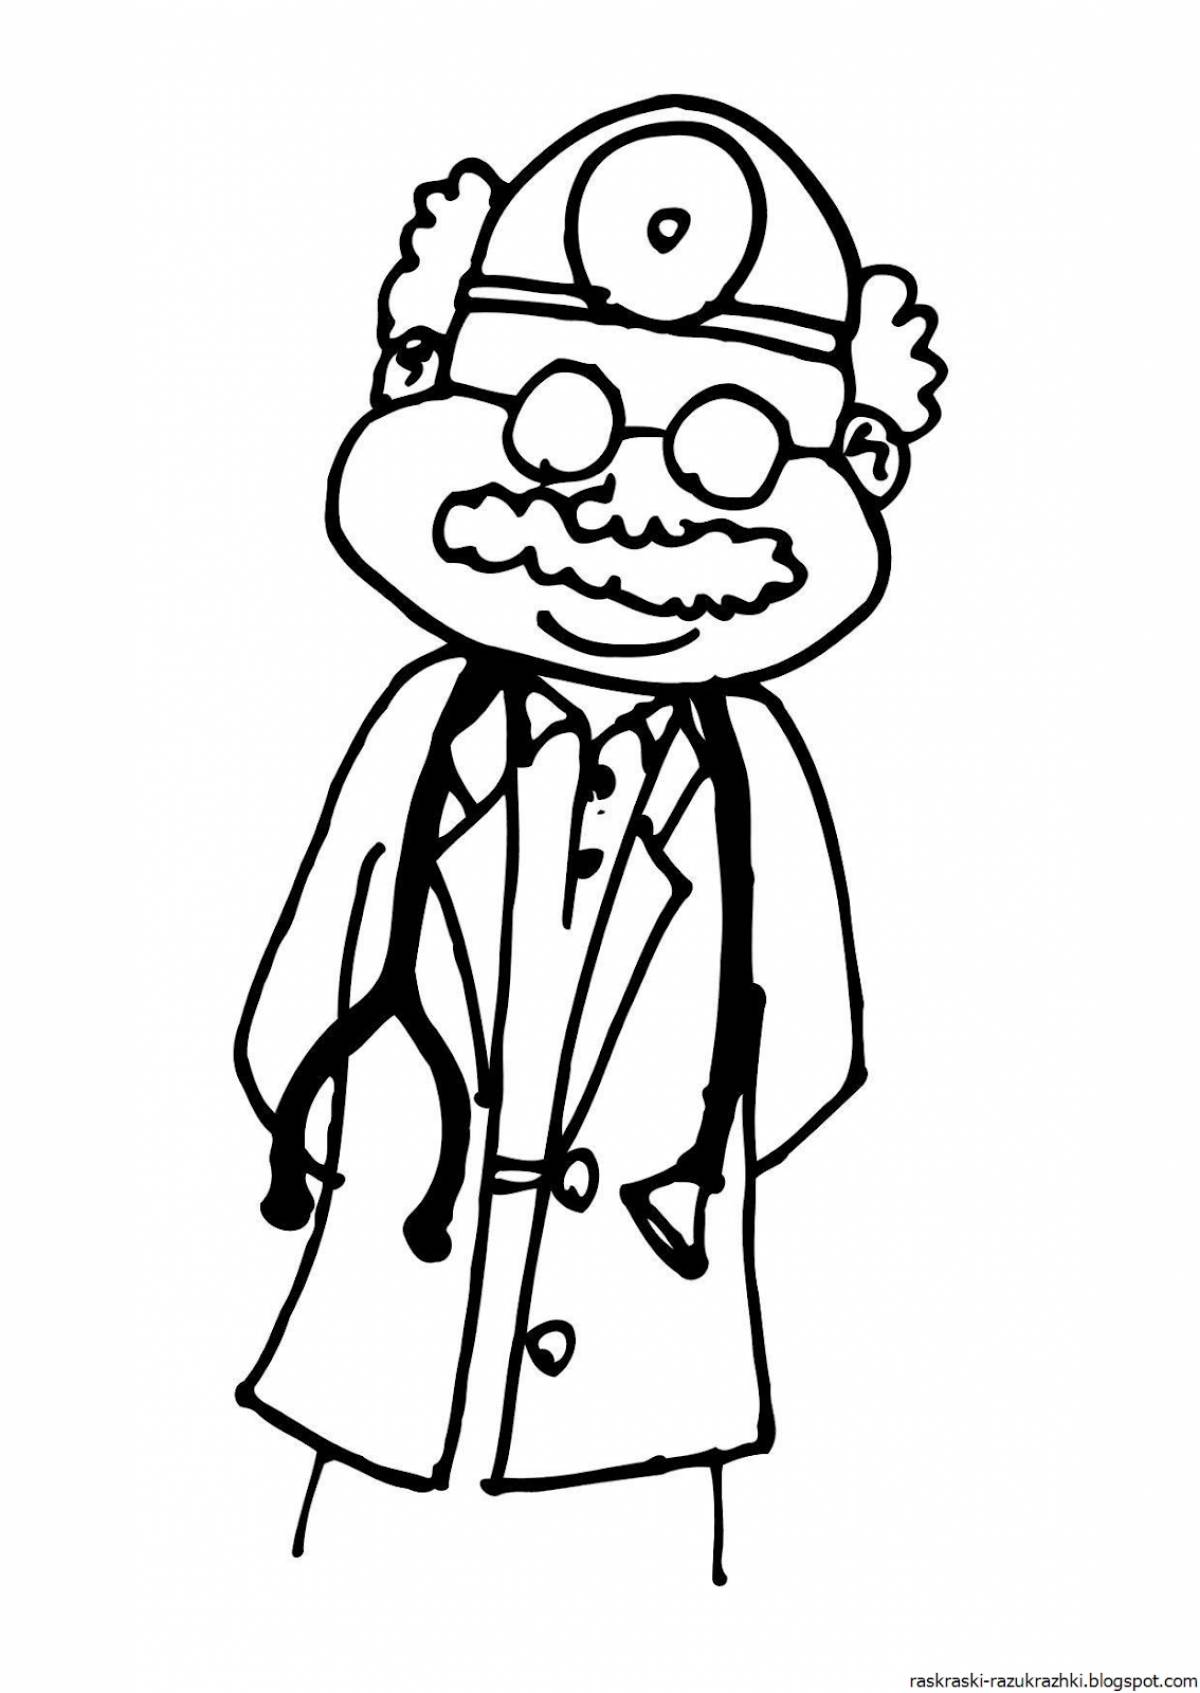 Surgeon live coloring for kids